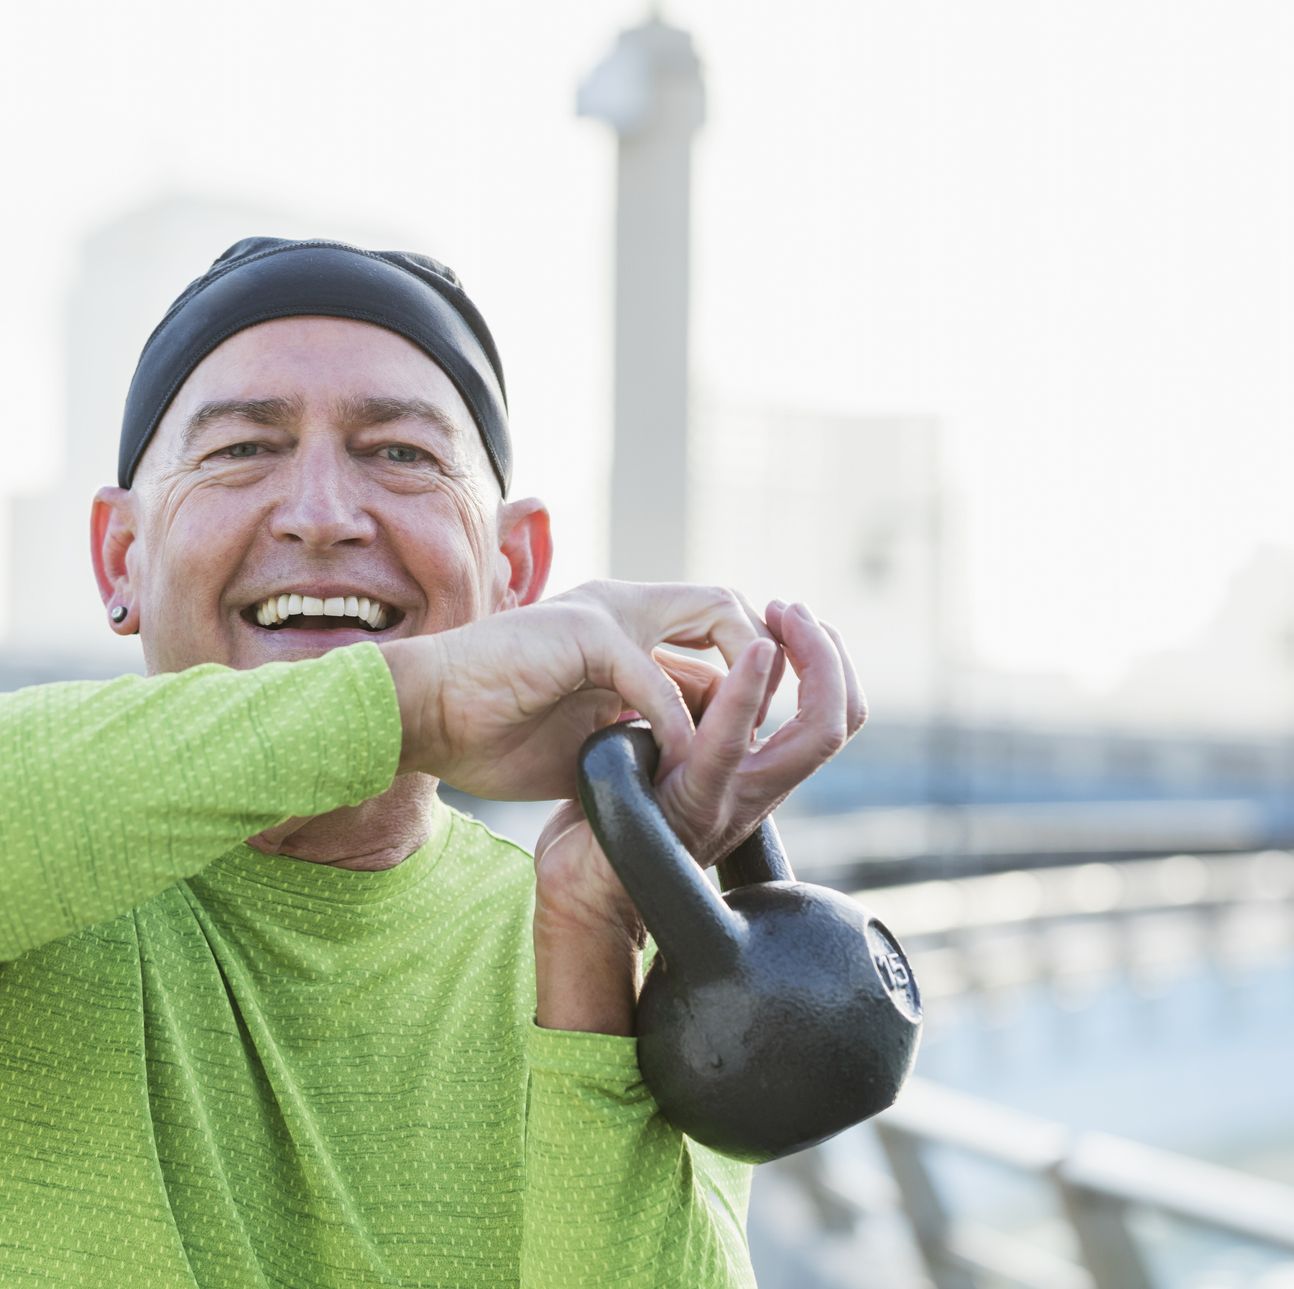 Men Over 40 Can Build Healthy Shoulders and Strong Abs With 1 Move